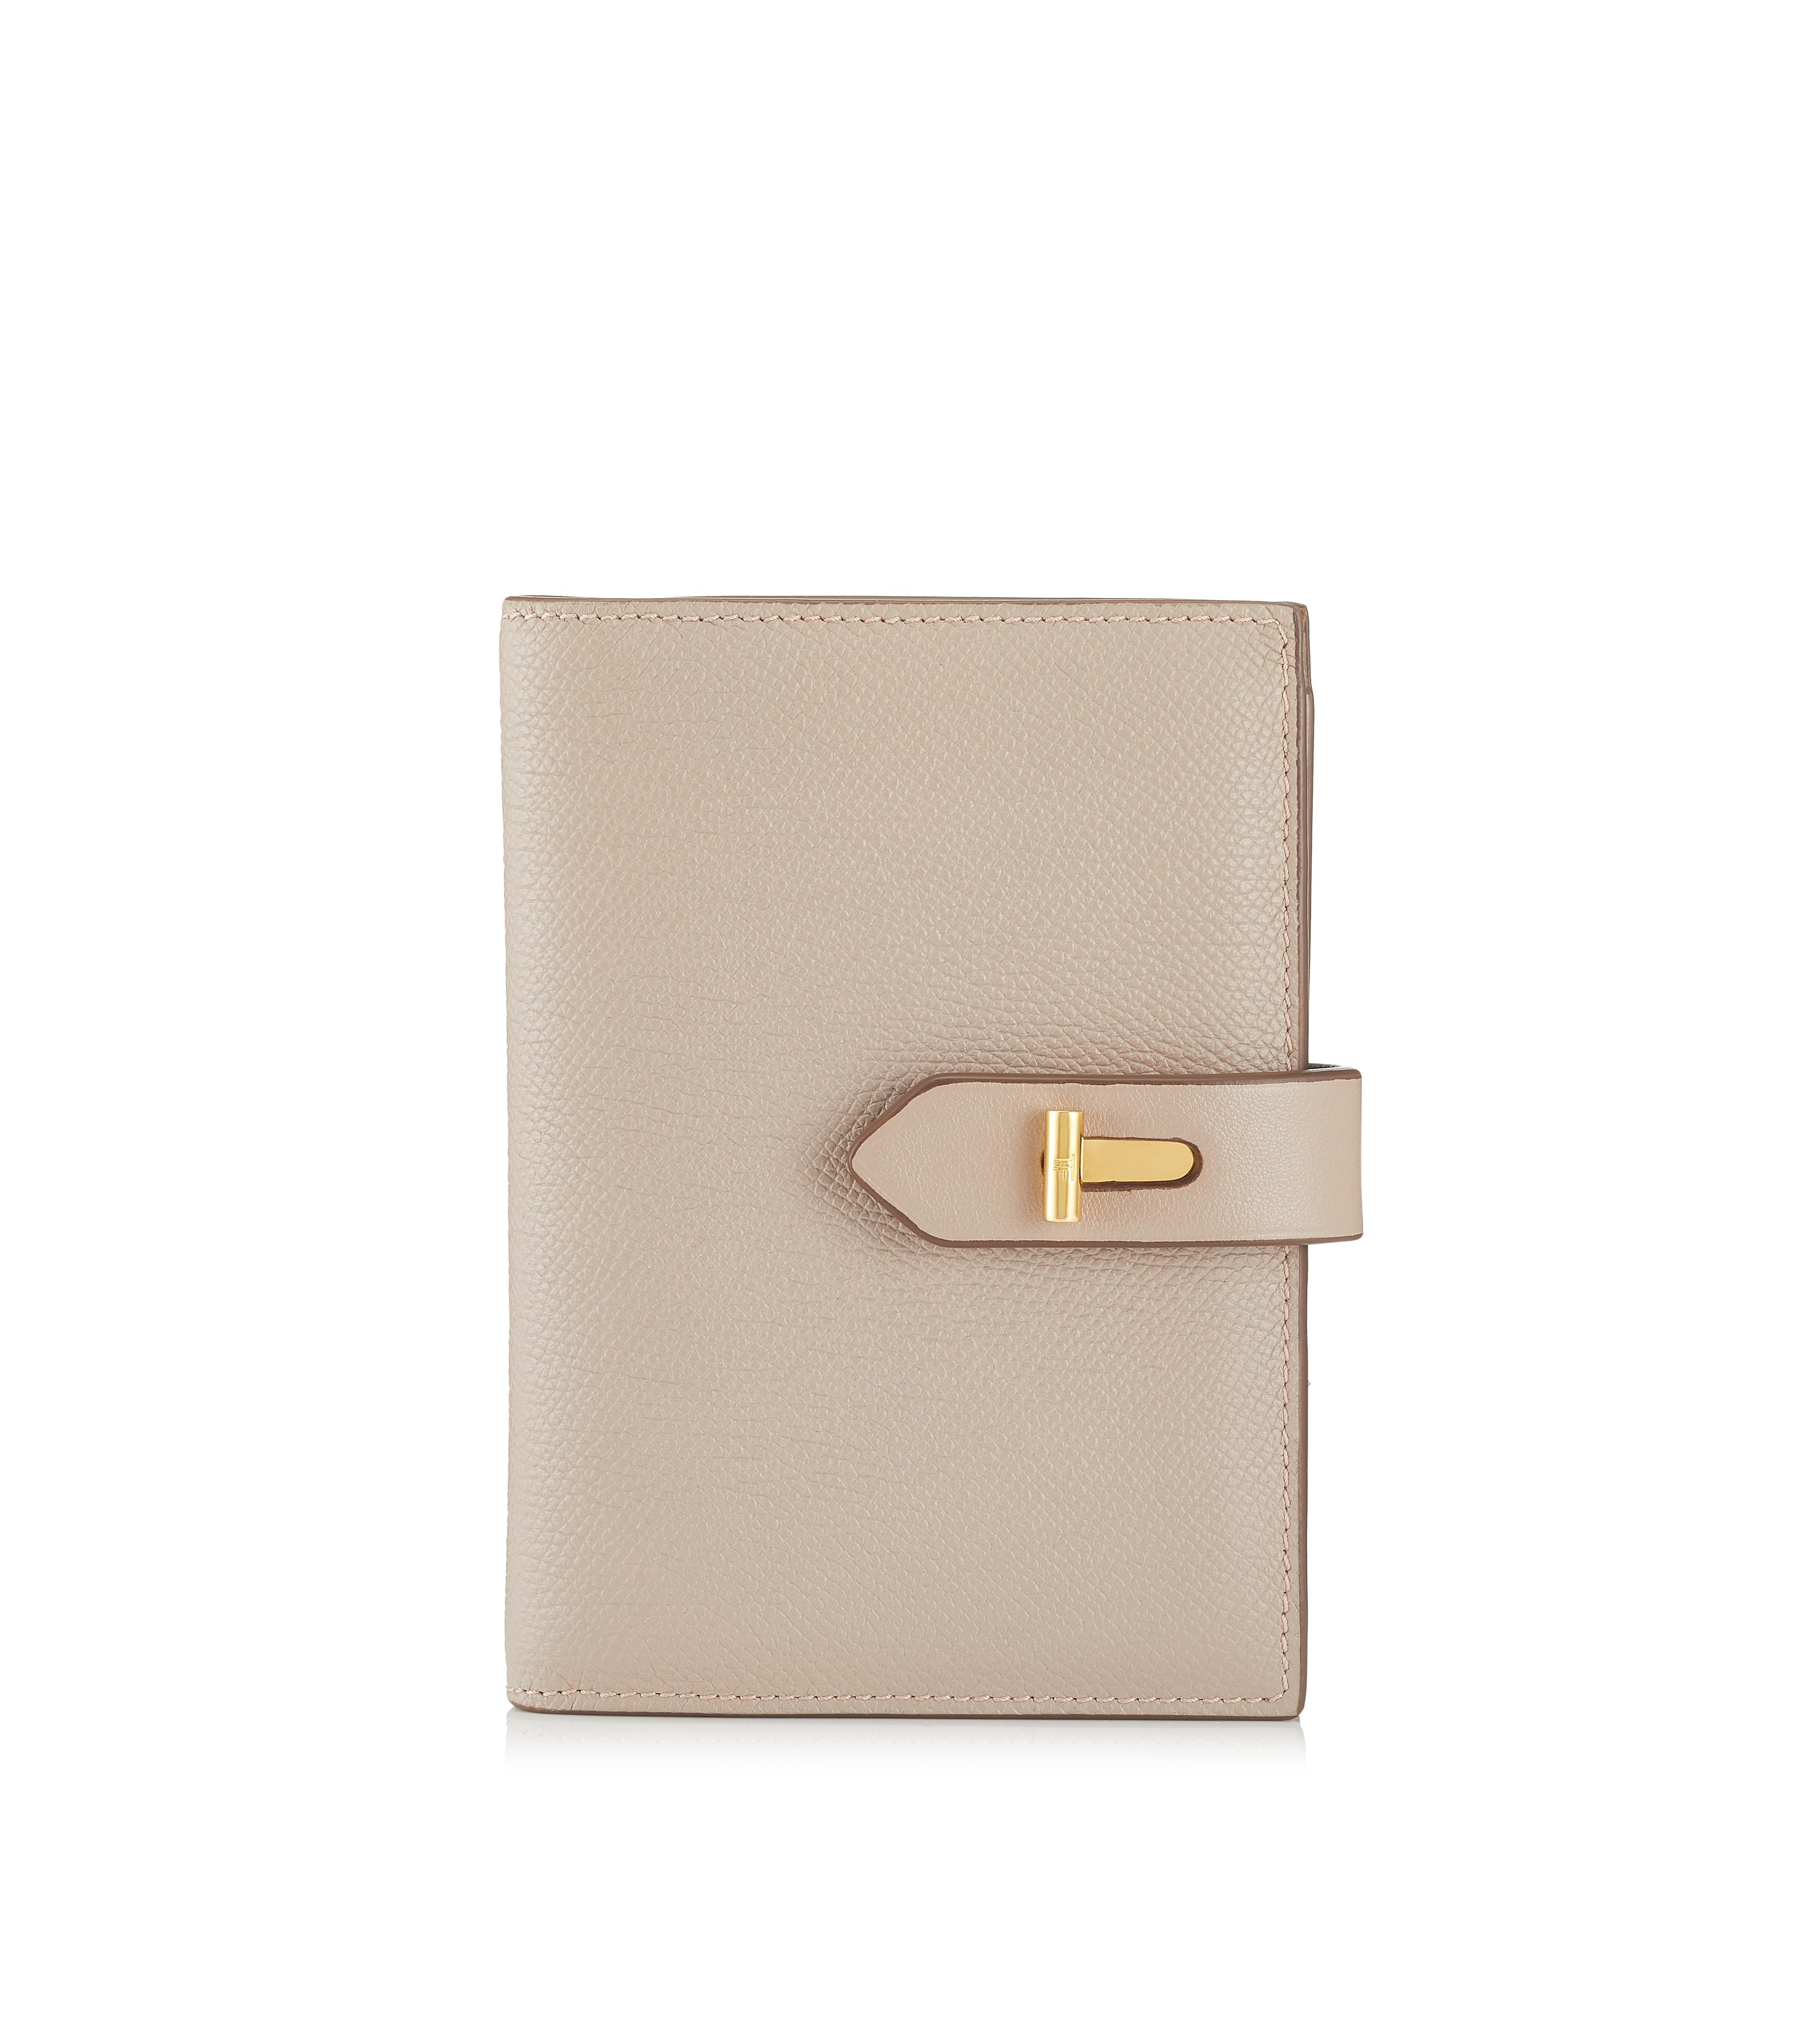 Small Leather Goods - Women's Accessories | TomFord.co.uk